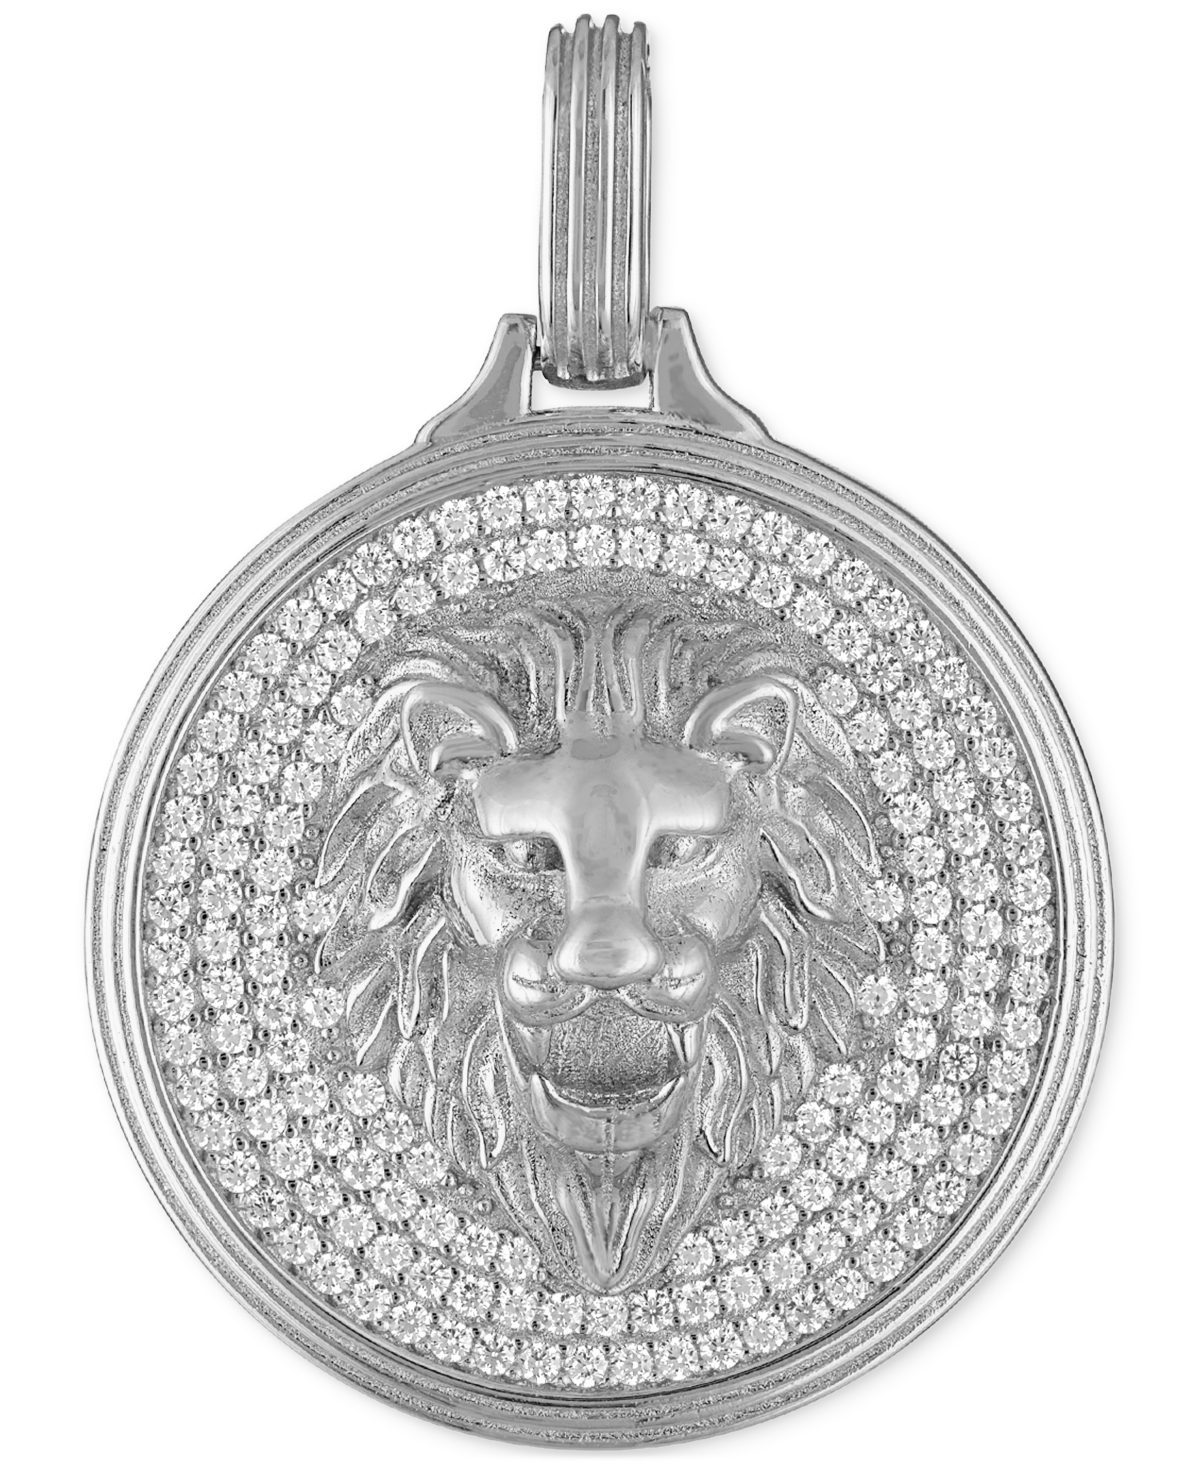 Esquire Men's Jewelry Cubic Zirconia Lion Pendant In Sterling Silver, Created For Macy's